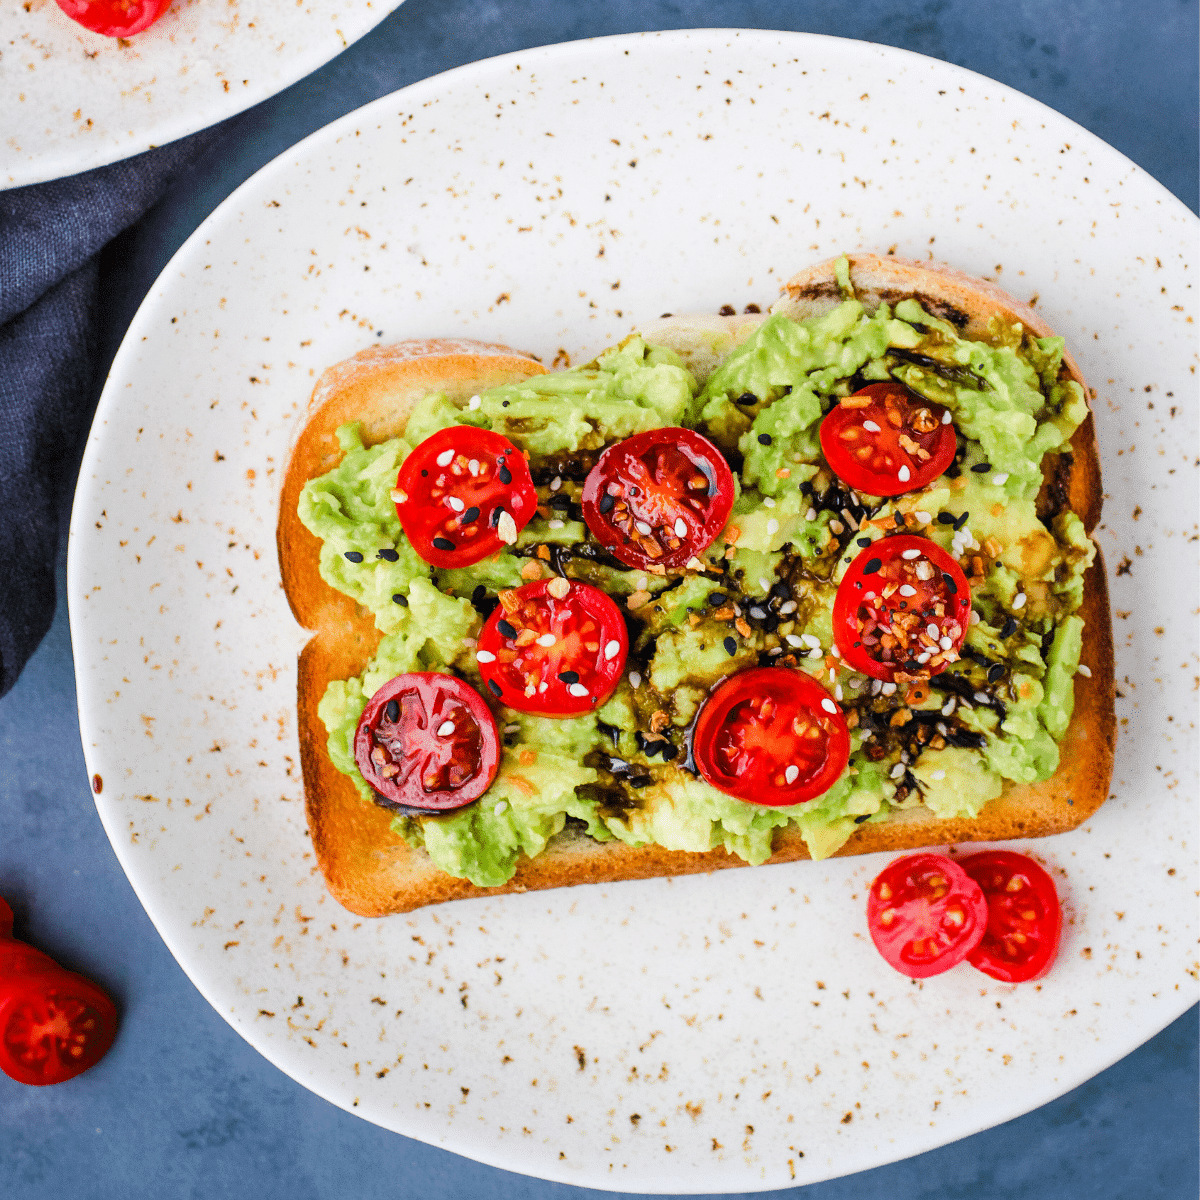 Avocado Toast with tomatoes and balsalmic glaze.